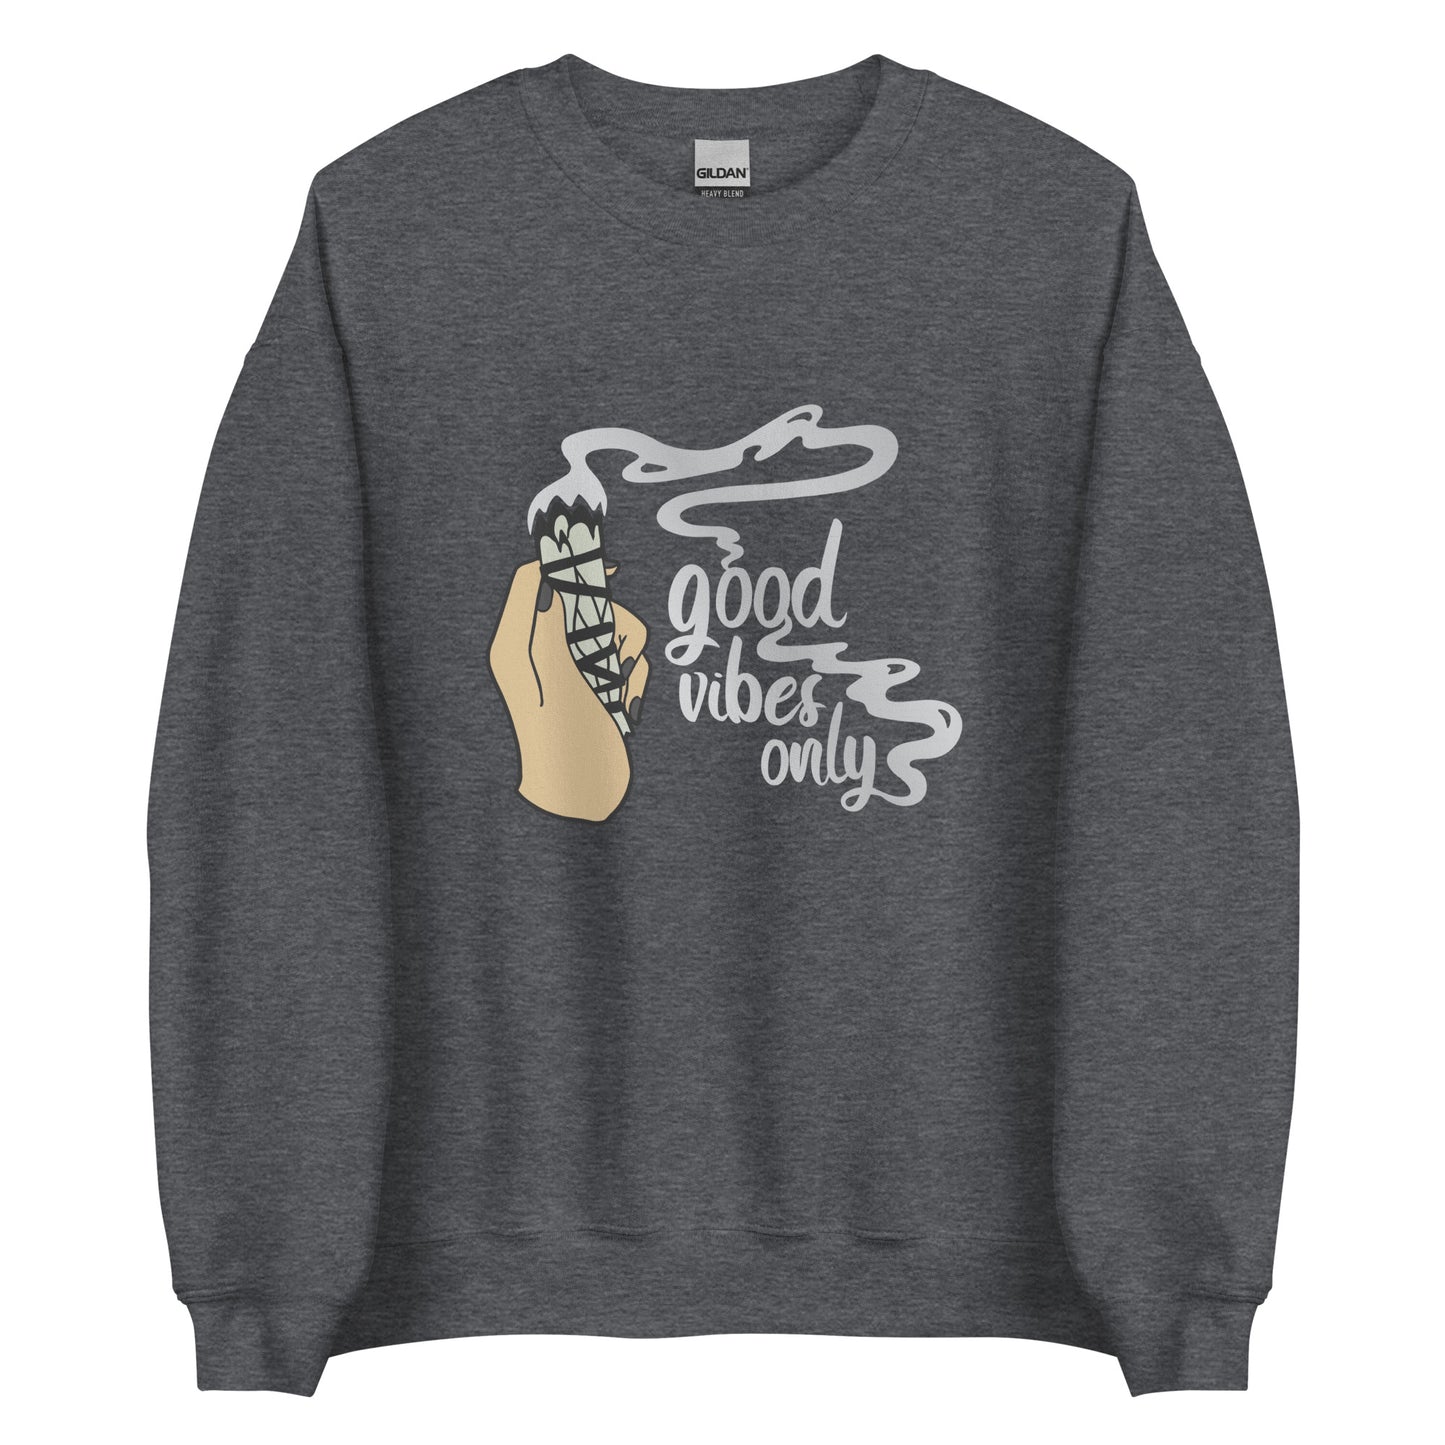 A dark heathered grey crewneck sweatshirt featuring an illustration of a hand holding a sage smudge stick. Smoke flows from the tip of the sage and forms text reading "Good vibes only"